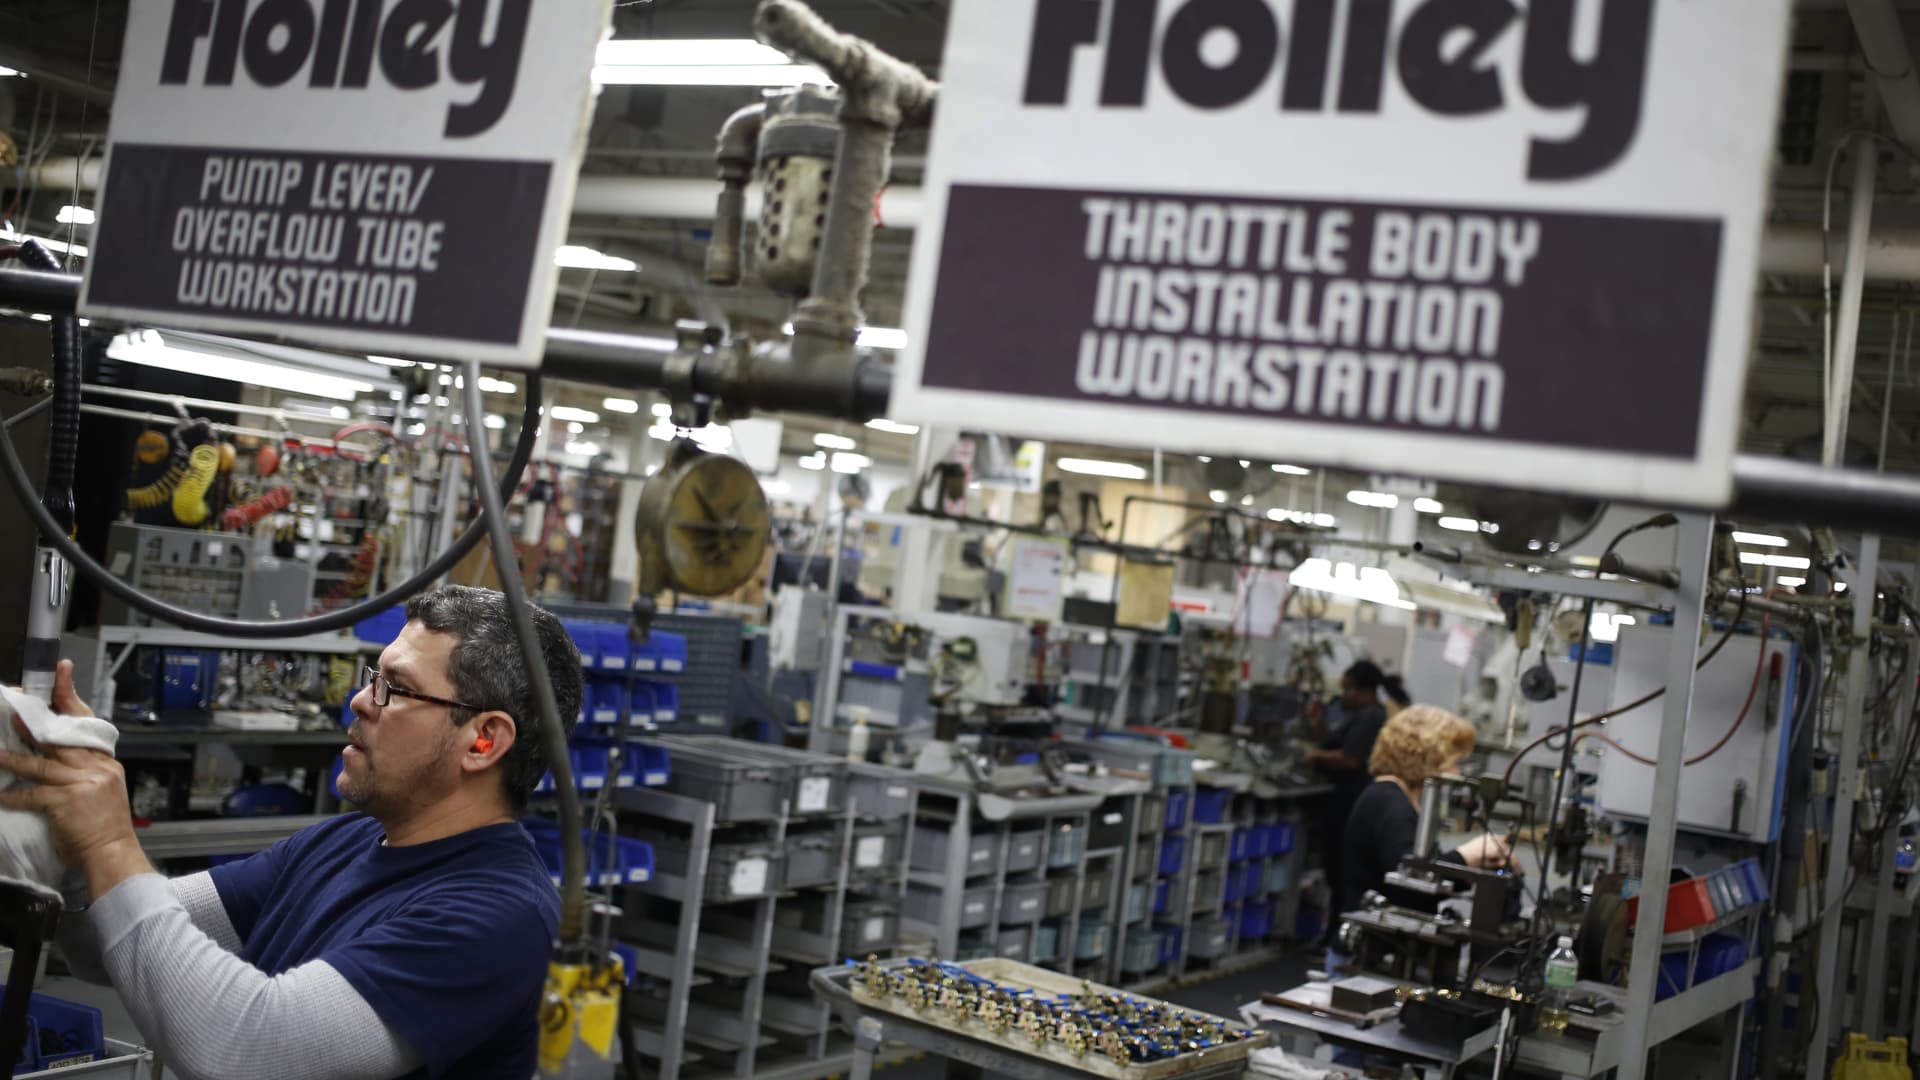 Holley CEO says the company is managing supply chain issues, looks to accelerate company growth